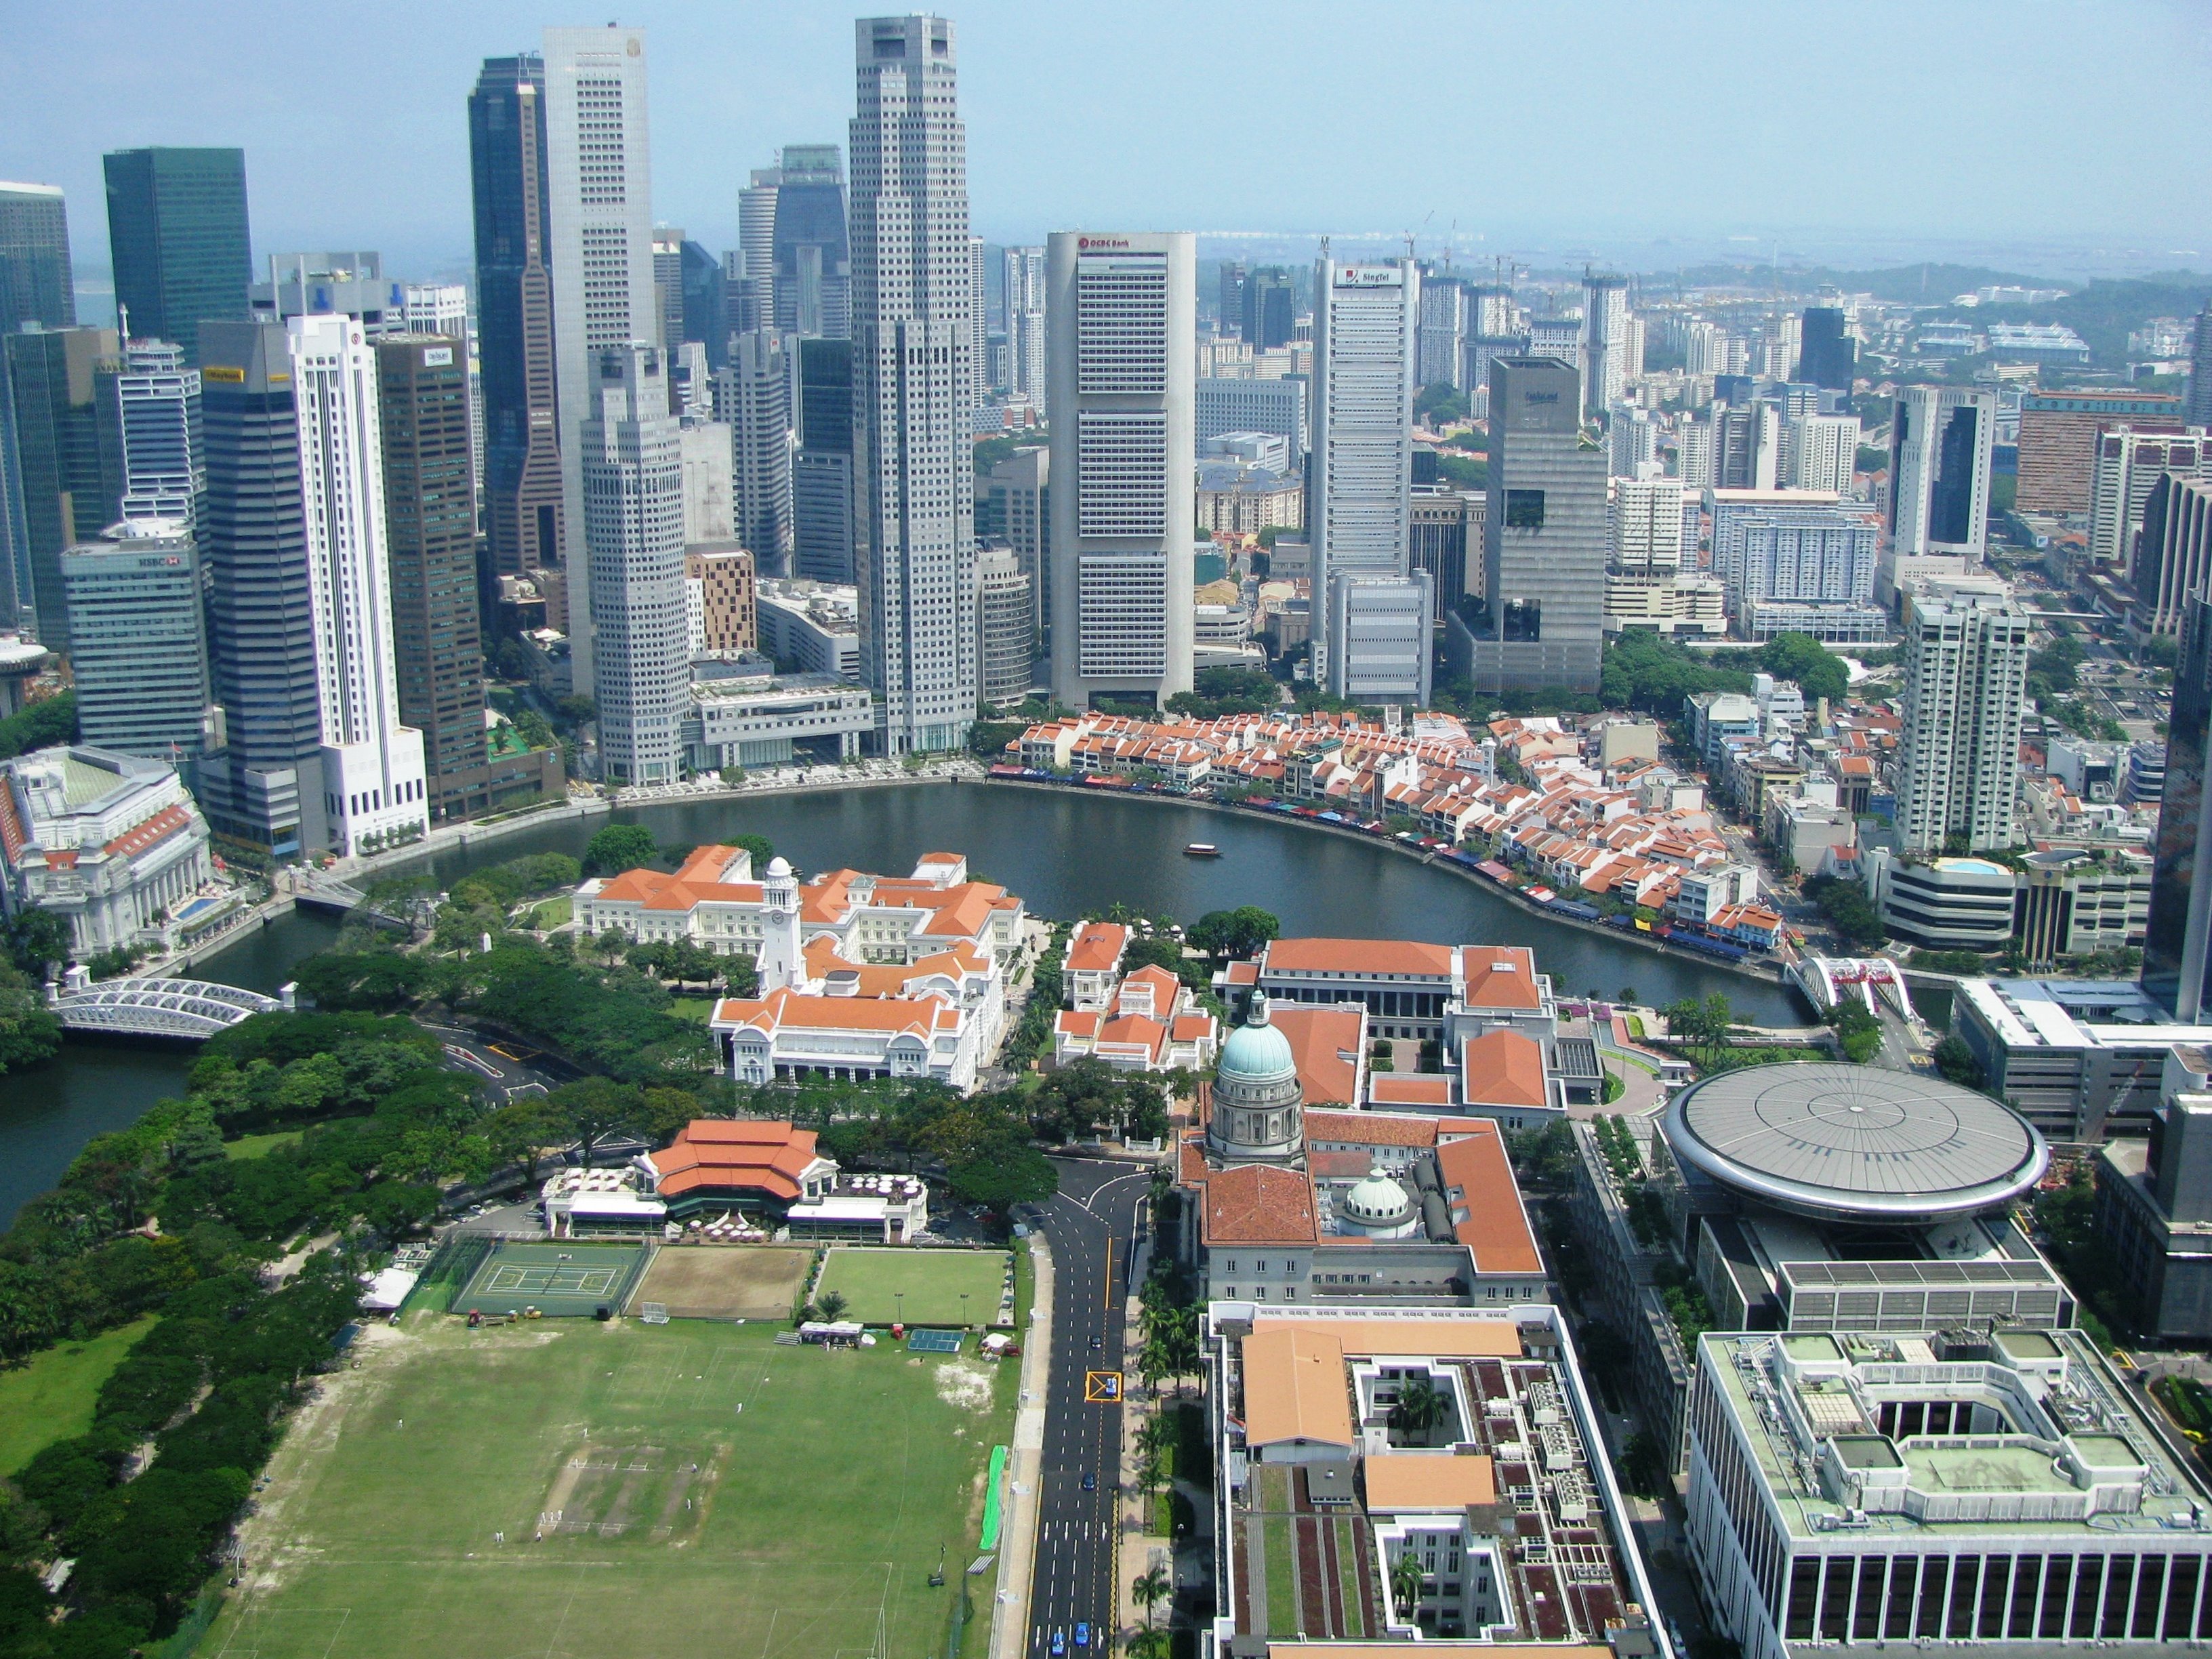 Aerial_view_of_the_Civic_District,_Singapore_River_and_Central_Business_District,_Singapore_-_20080518